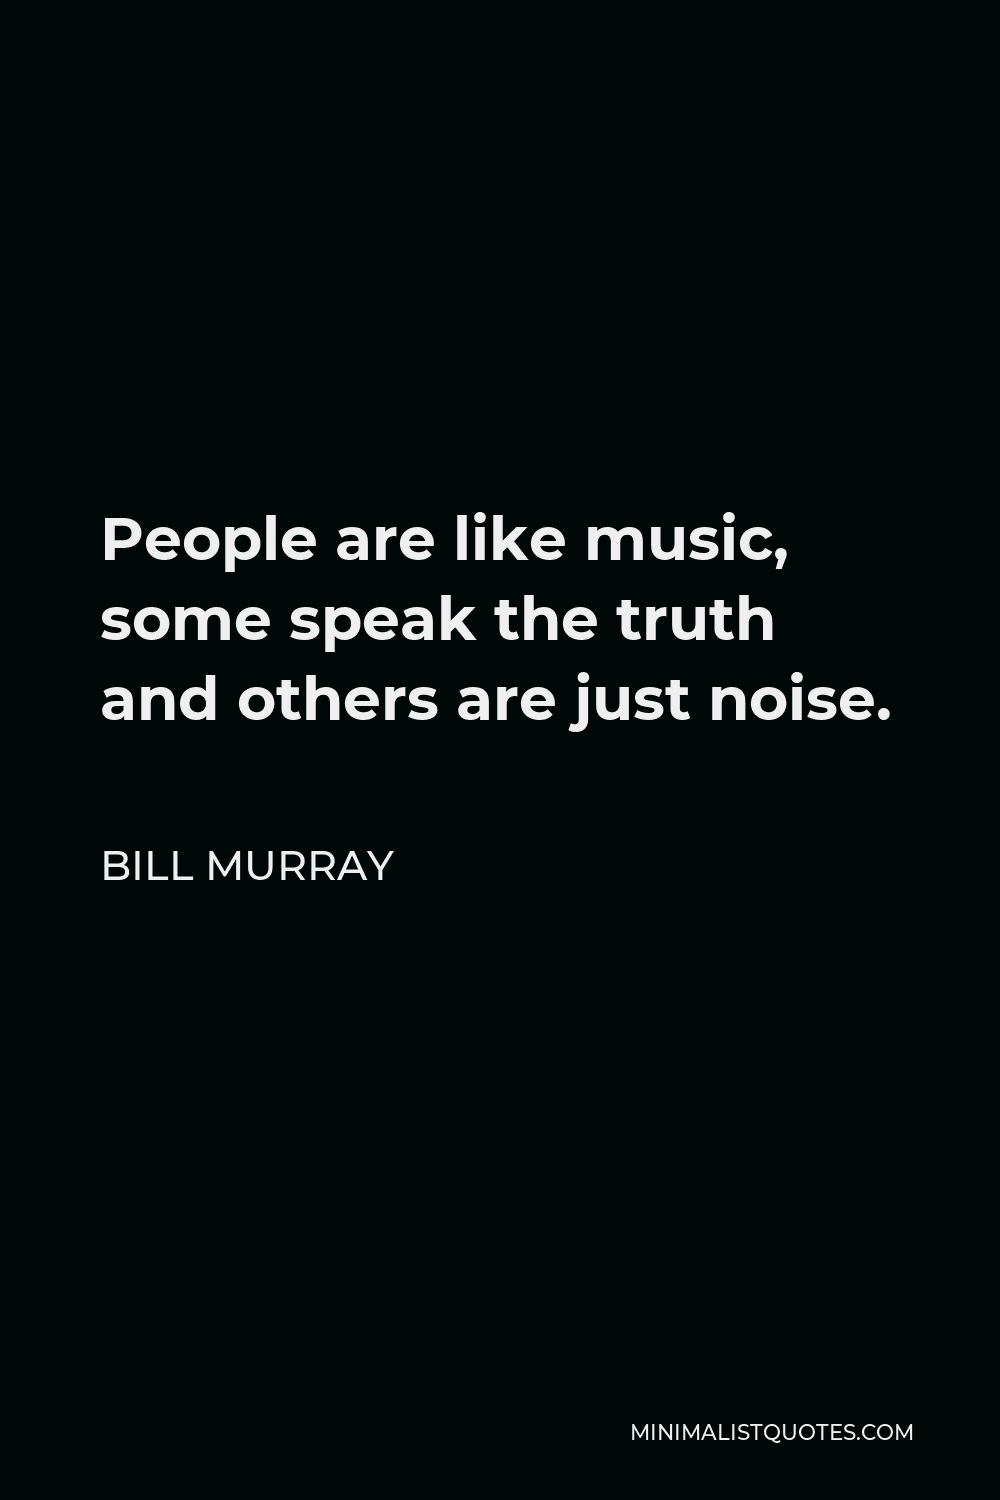 Bill Murray Quote - People are like music, some speak the truth and others are just noise.